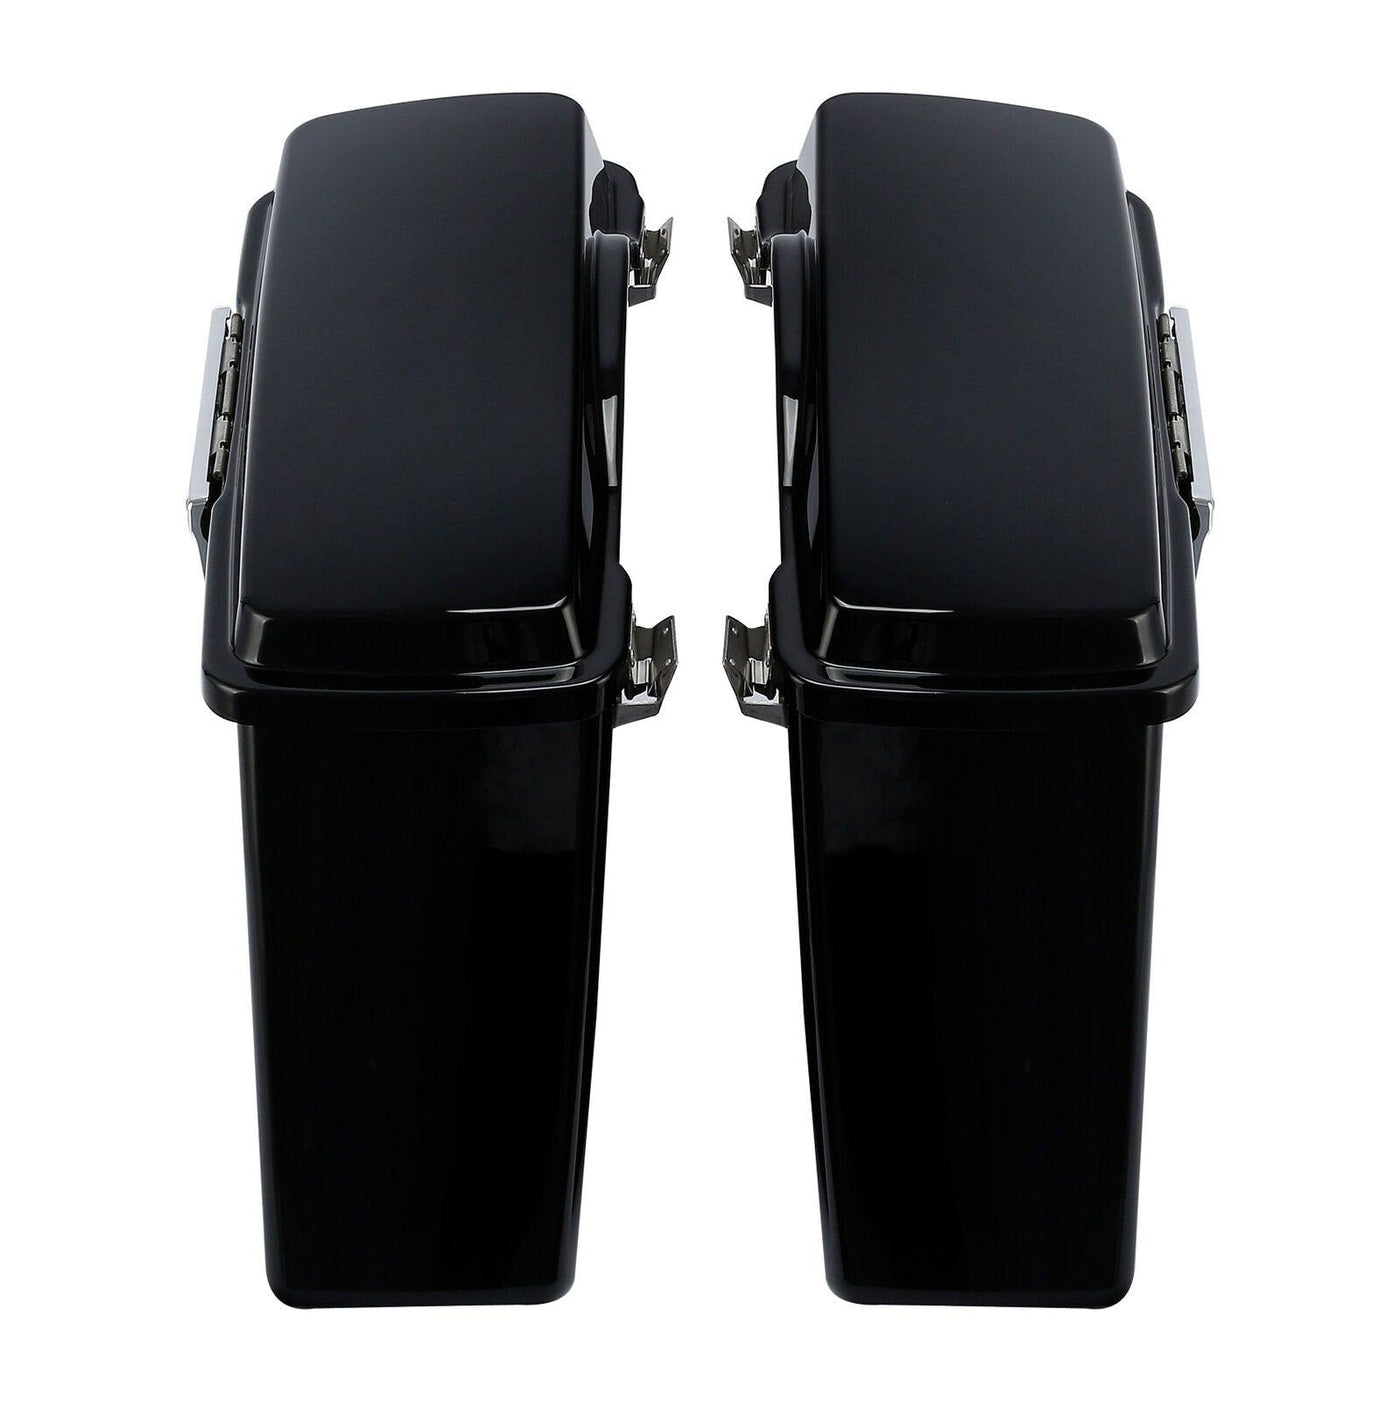 Hard Saddle Bags & LED Rear Fender Fit For Harley Electra Street Glide 09-13 15 - Moto Life Products